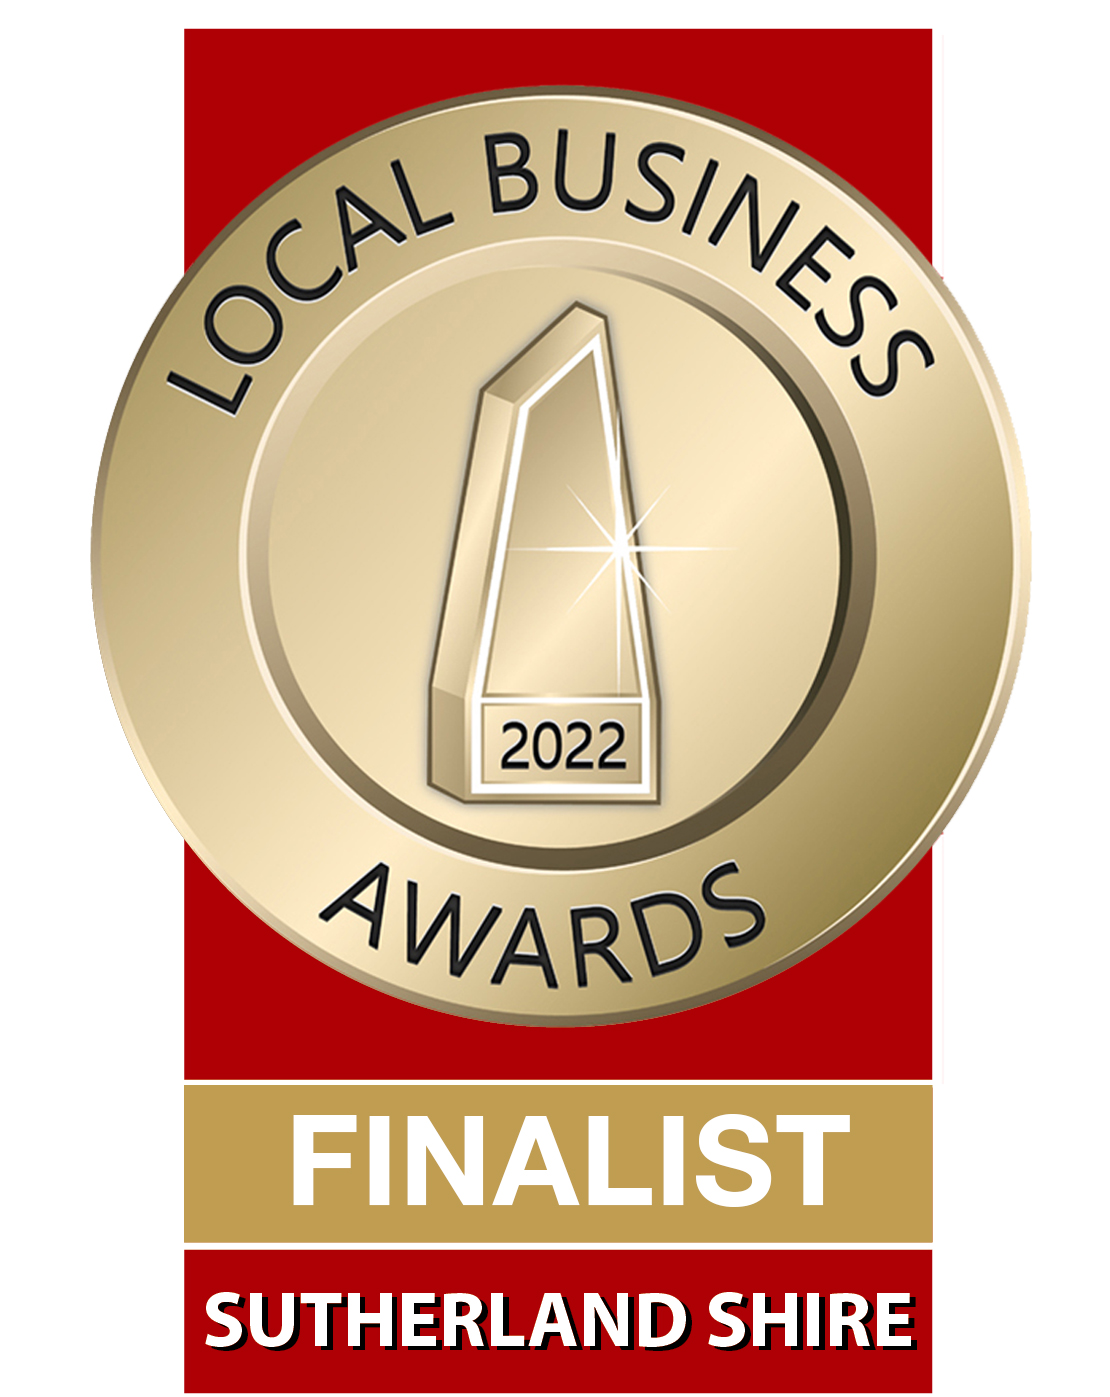 2022 Finalist Sutherland Shire Local Business Awards